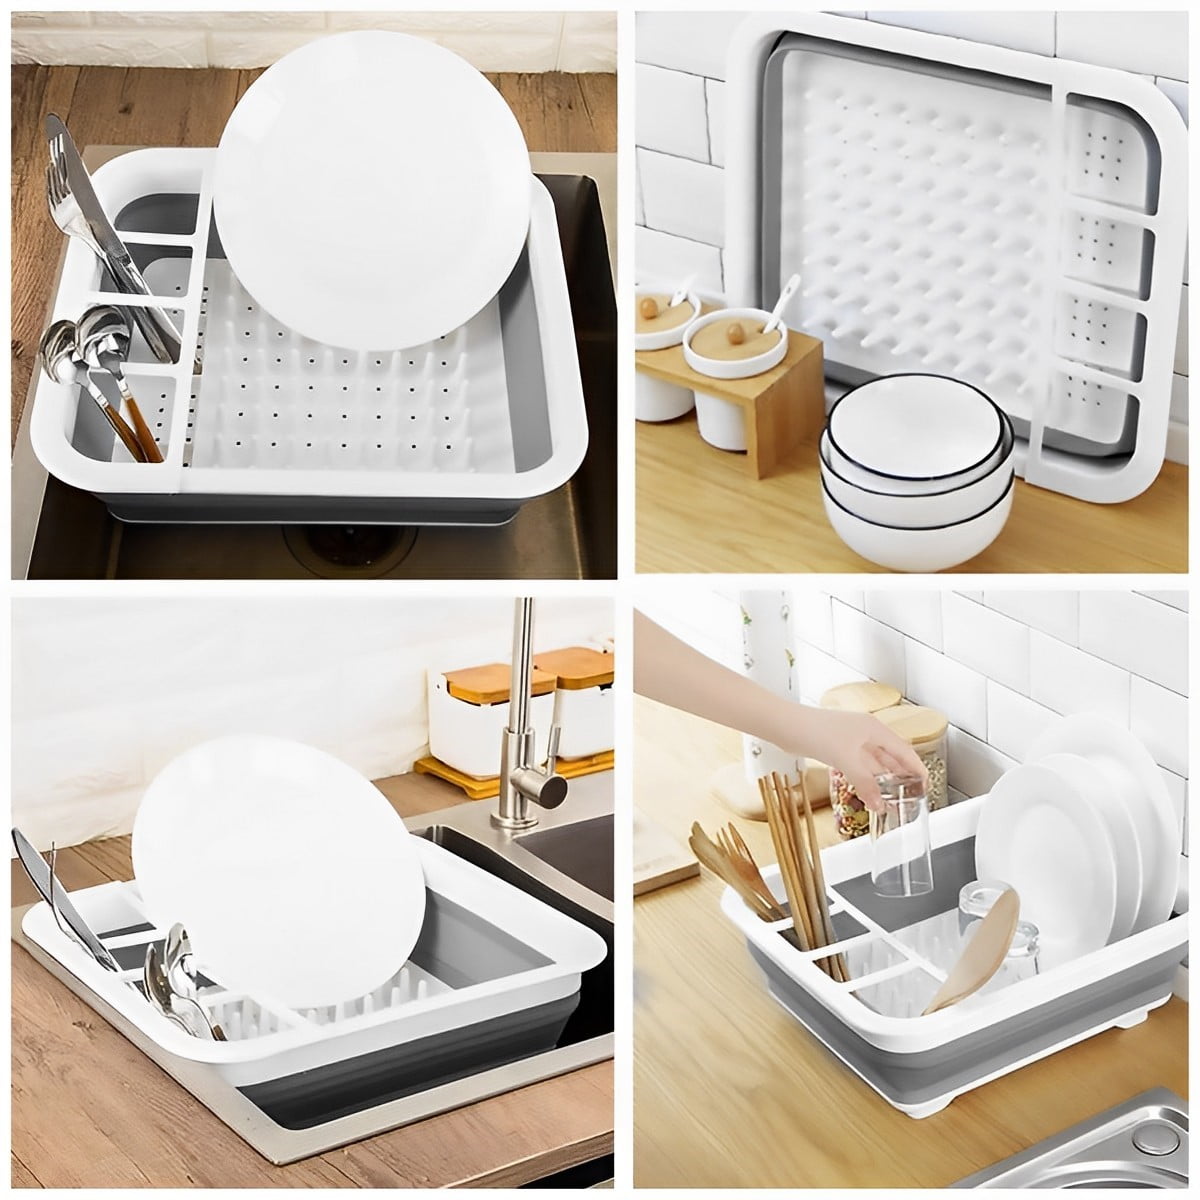  Masirs Pop-Up Collapsible Dish Drying Rack: Convenient  Storage, Drains into Sink, Eight Large Plate Capacity, Sectional Cutlery  and Utensil Compartment. Compact and Portable Design.